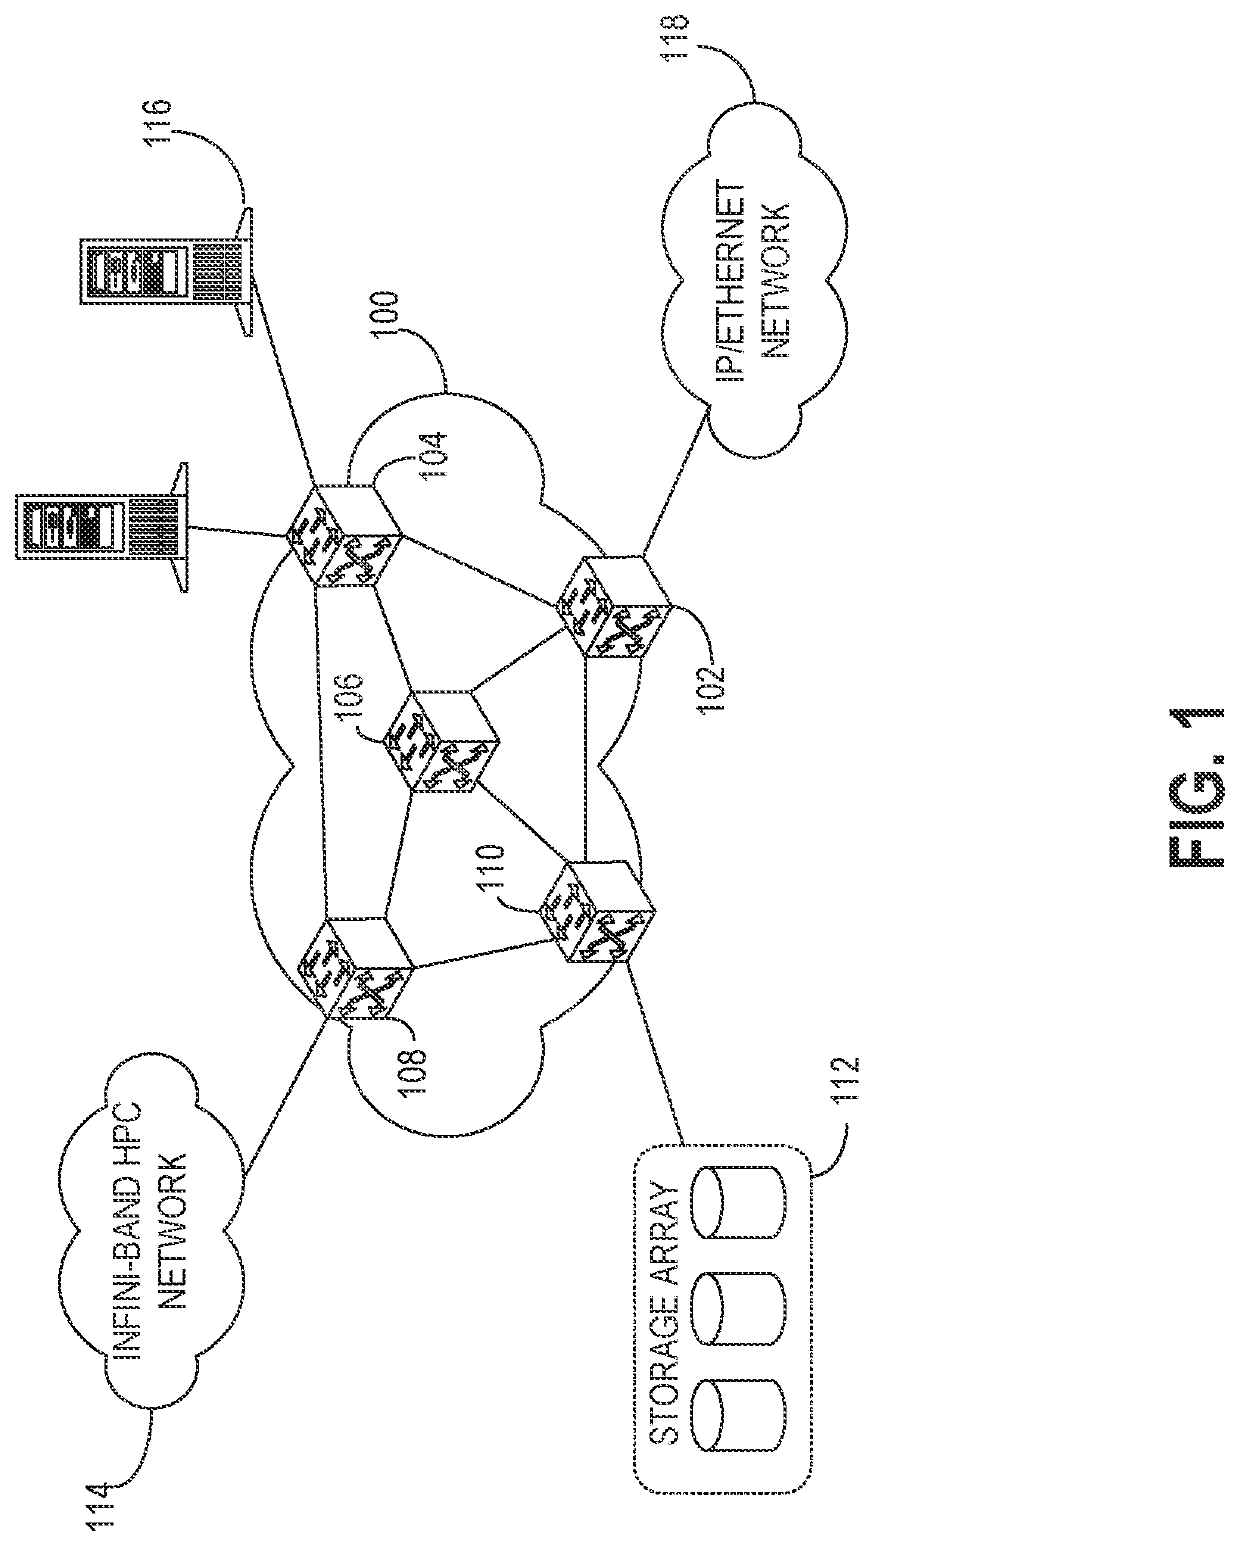 Optimized adaptive routing to reduce number of hops